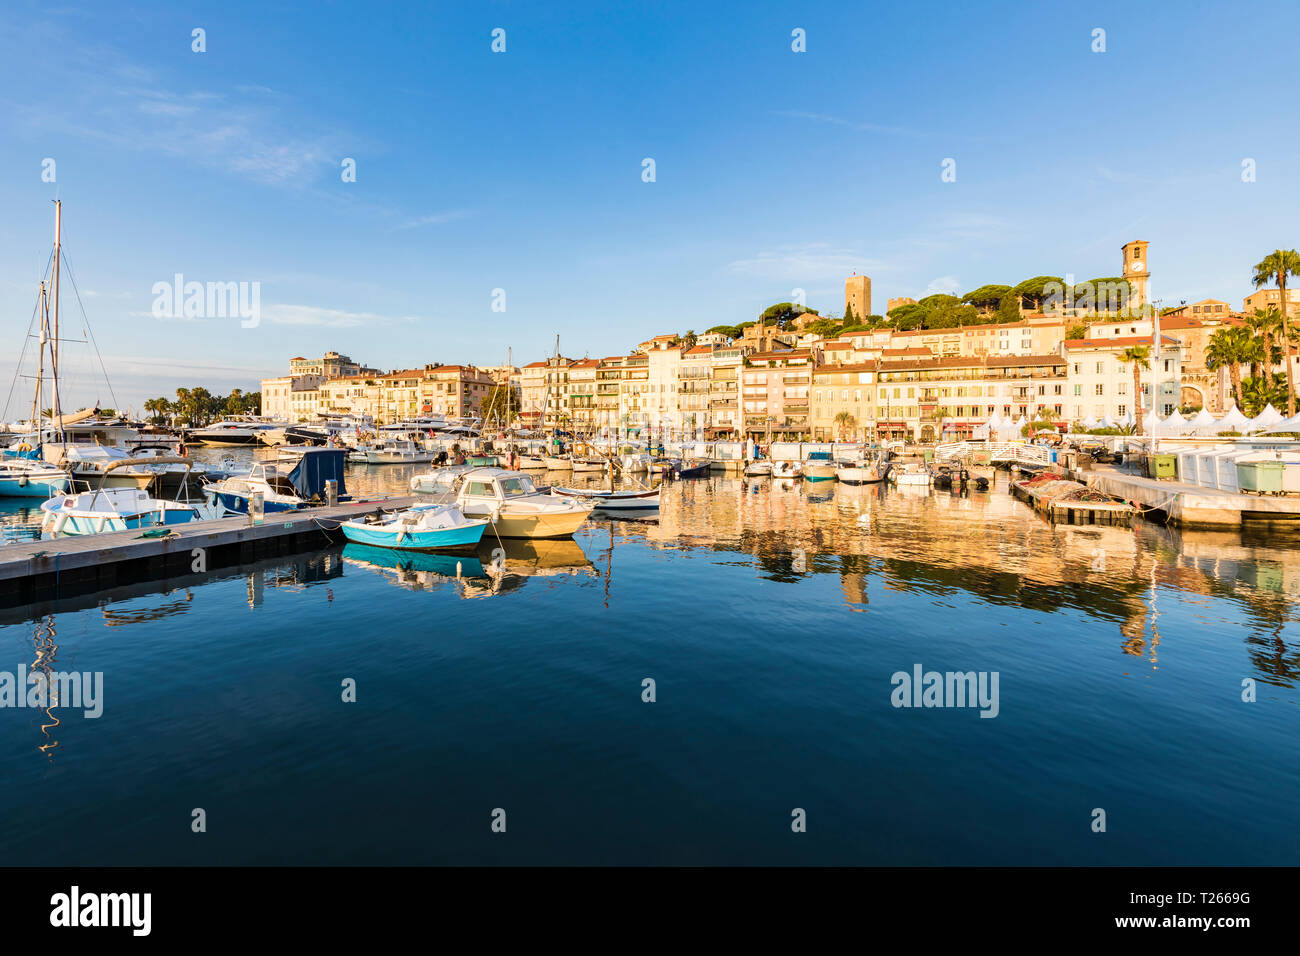 France, Provence-Alpes-Cote d'Azur, Cannes, Le Suquet, Old town, fishing harbour and boats Stock Photo